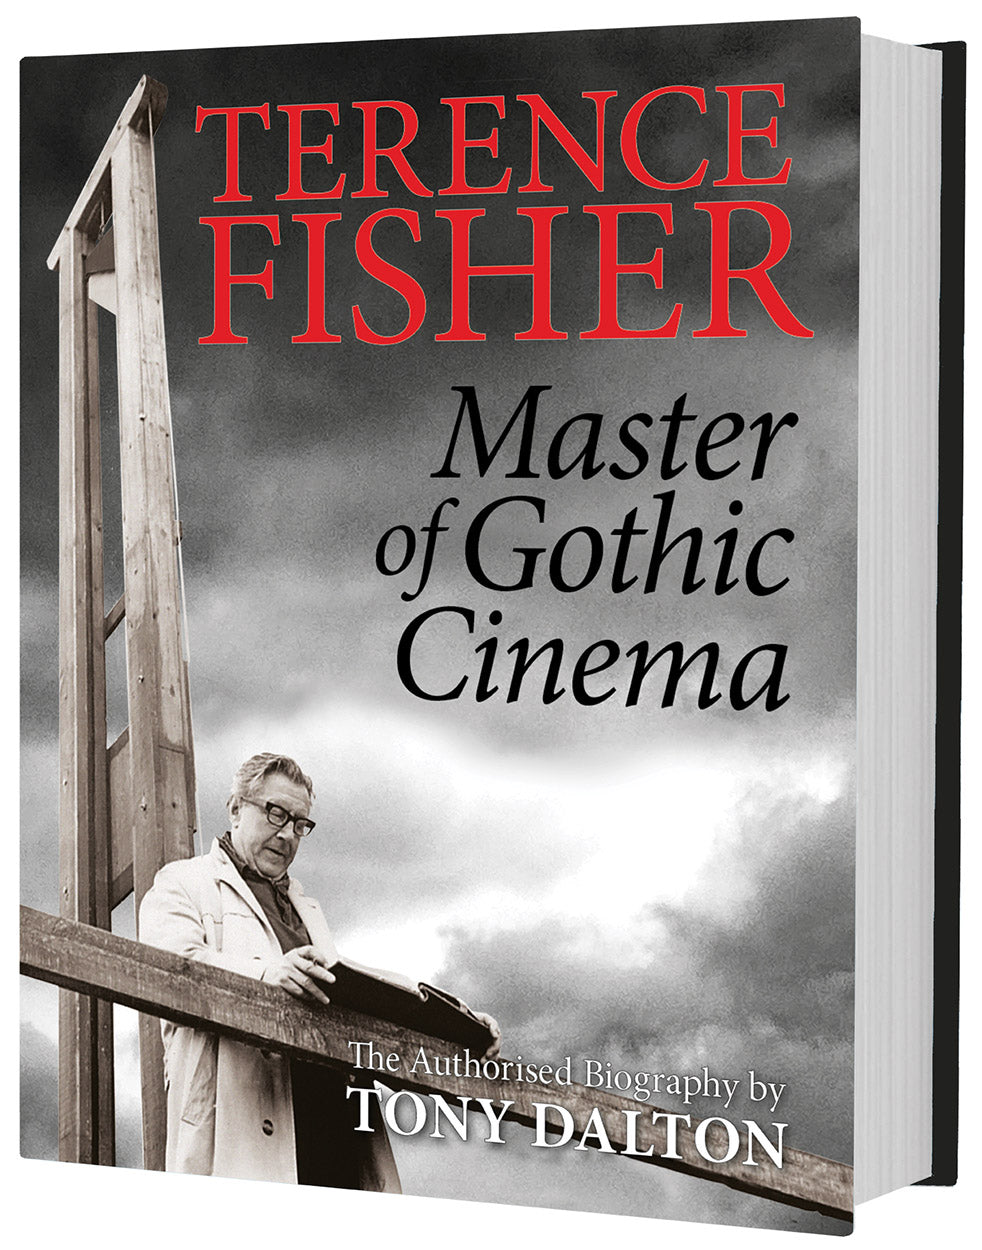 Terence Fisher - Master Of Gothic Cinema de Tony Dalton - front cover